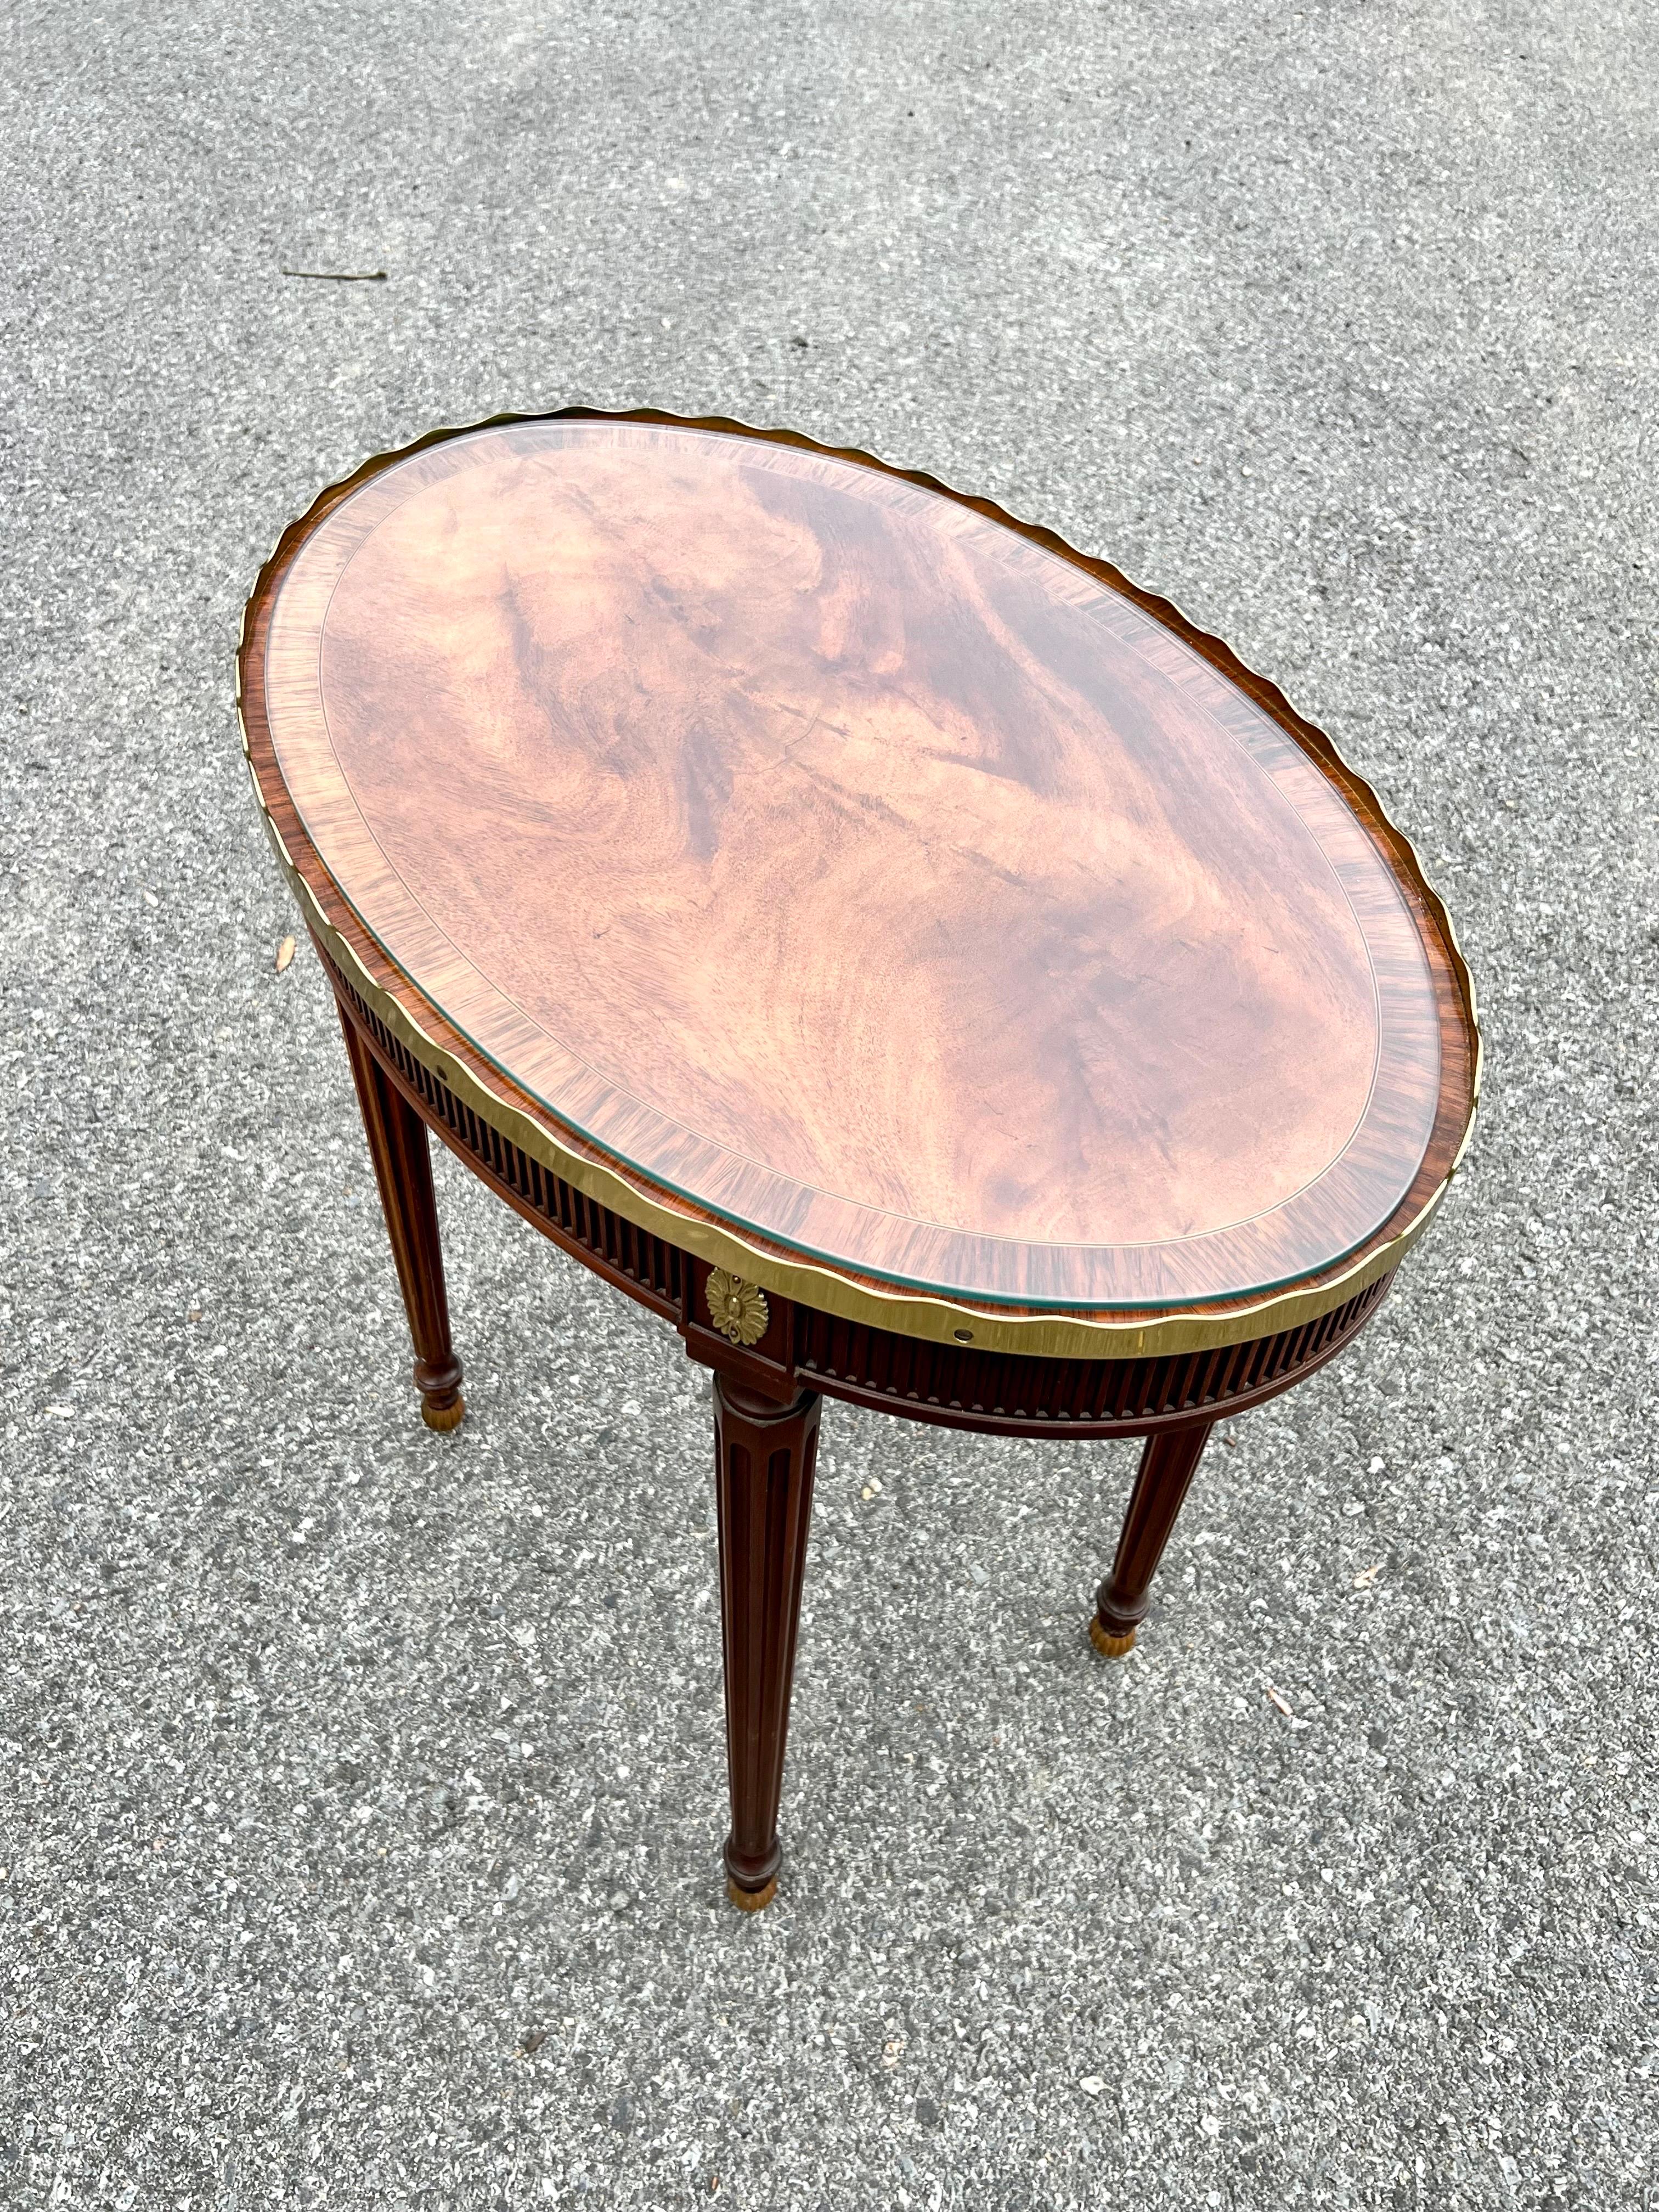 Vintage Mahogany Oval Side Table W/ Shaped Brass Gallery Made by Baker Furniture For Sale 4